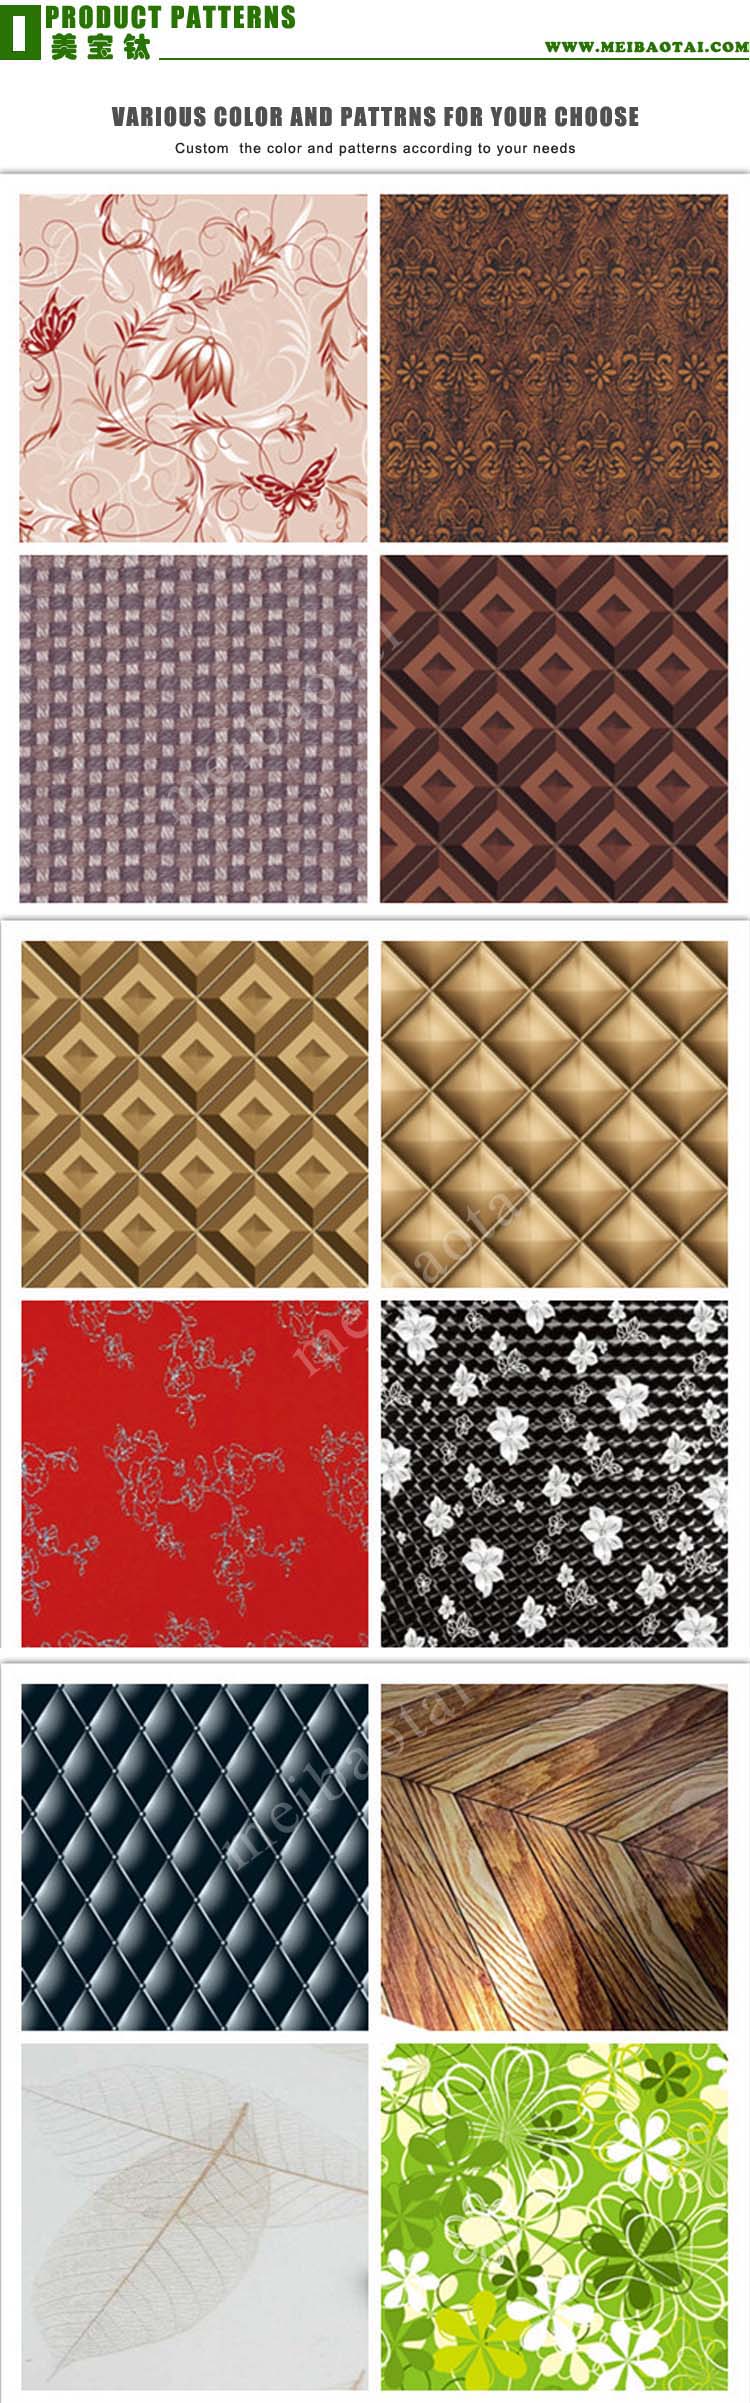 laminated_products_patterns